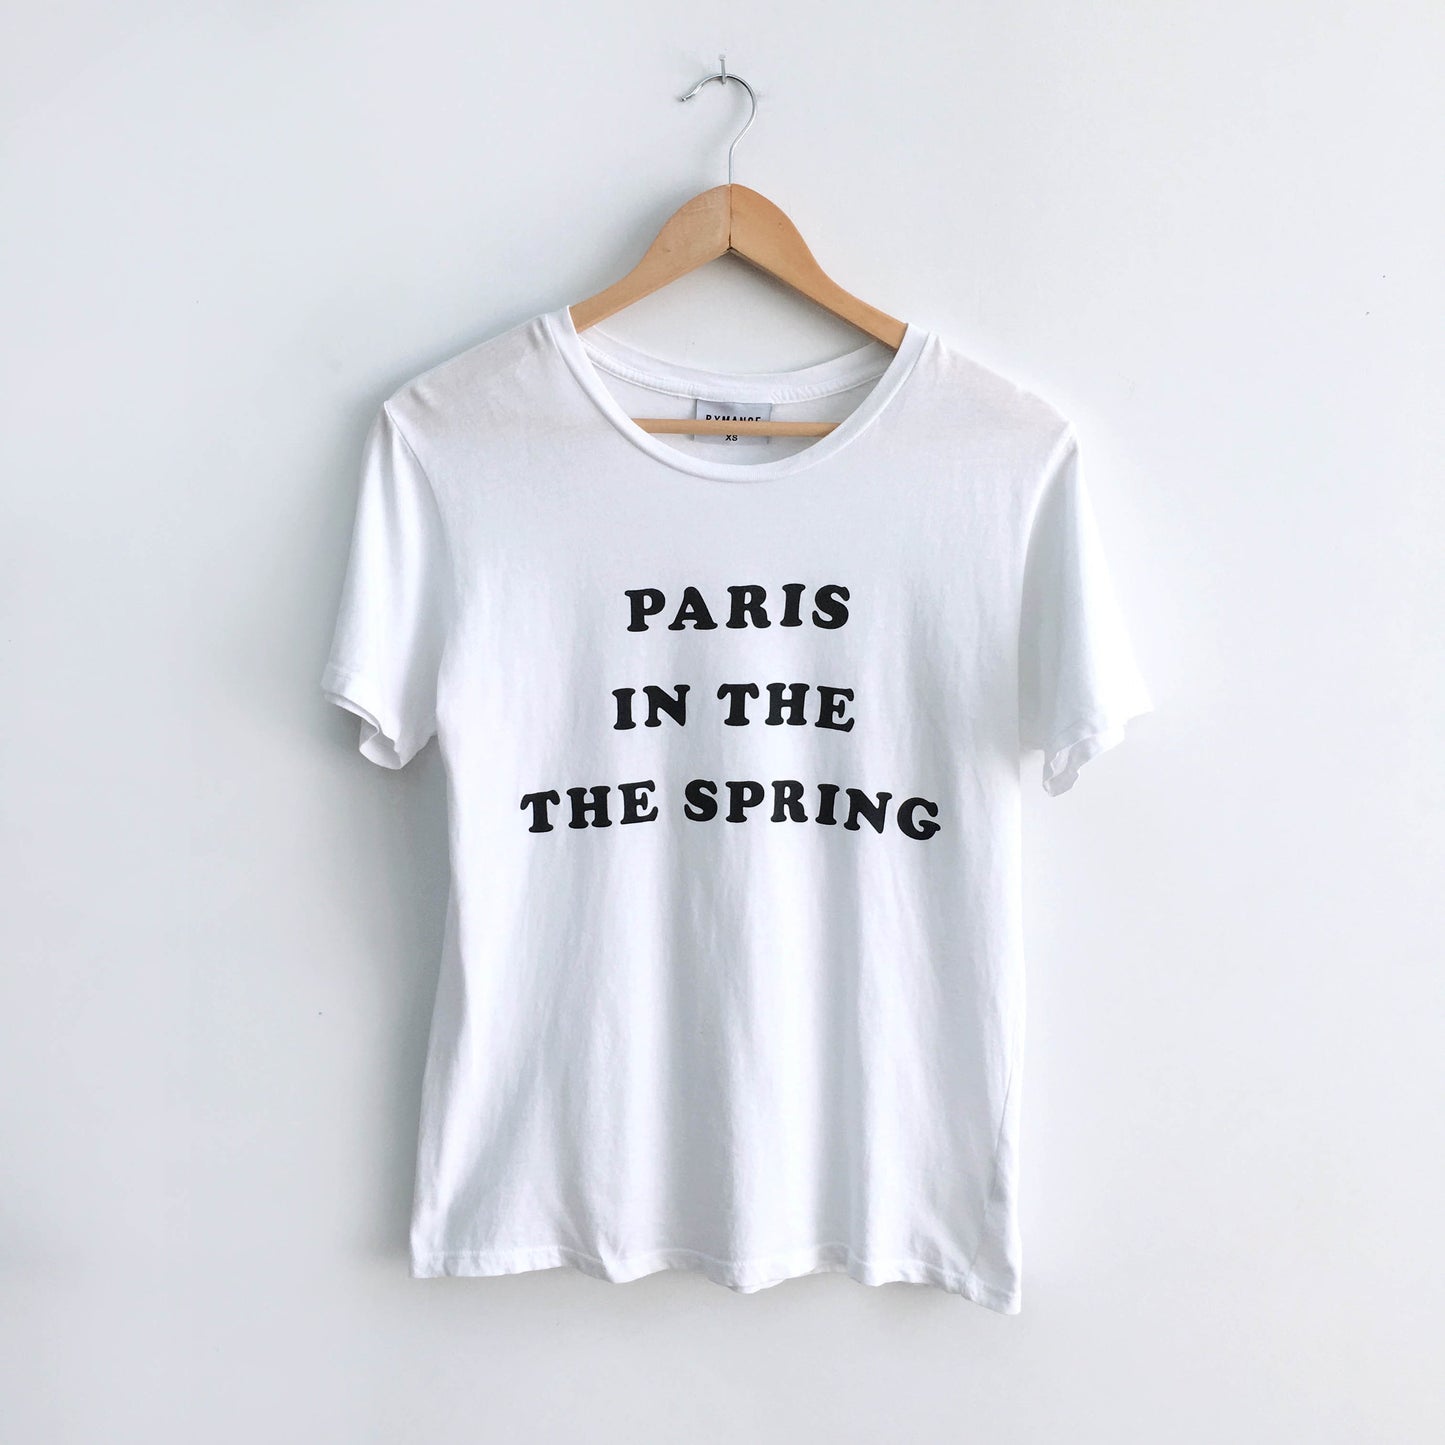 Rxmance Paris in the Spring tee - size xs